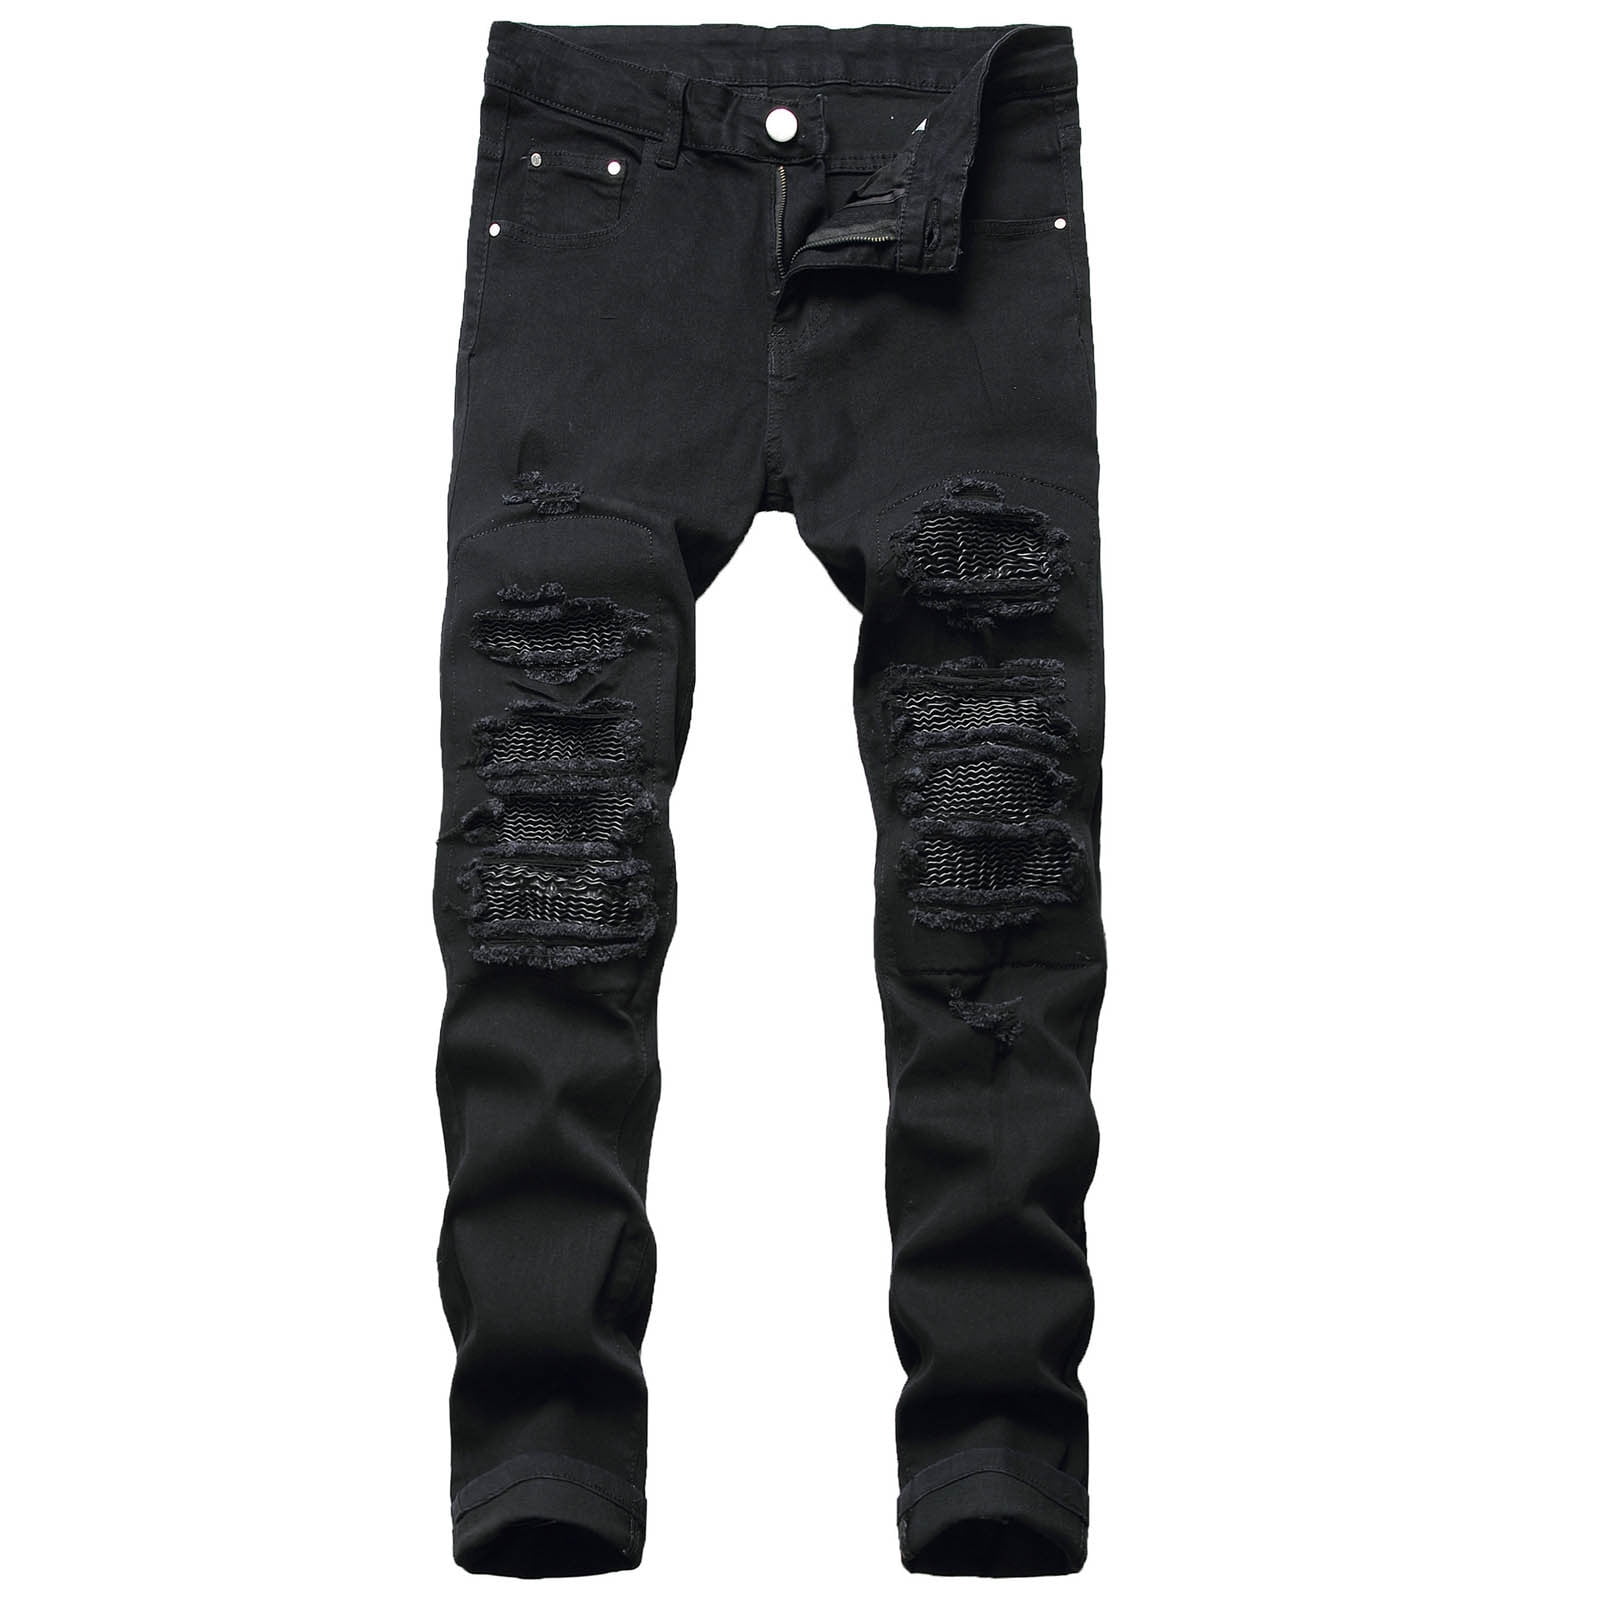 Clearance Gallickan Mens Ripped Jeans Blue Black Ripped Distressed